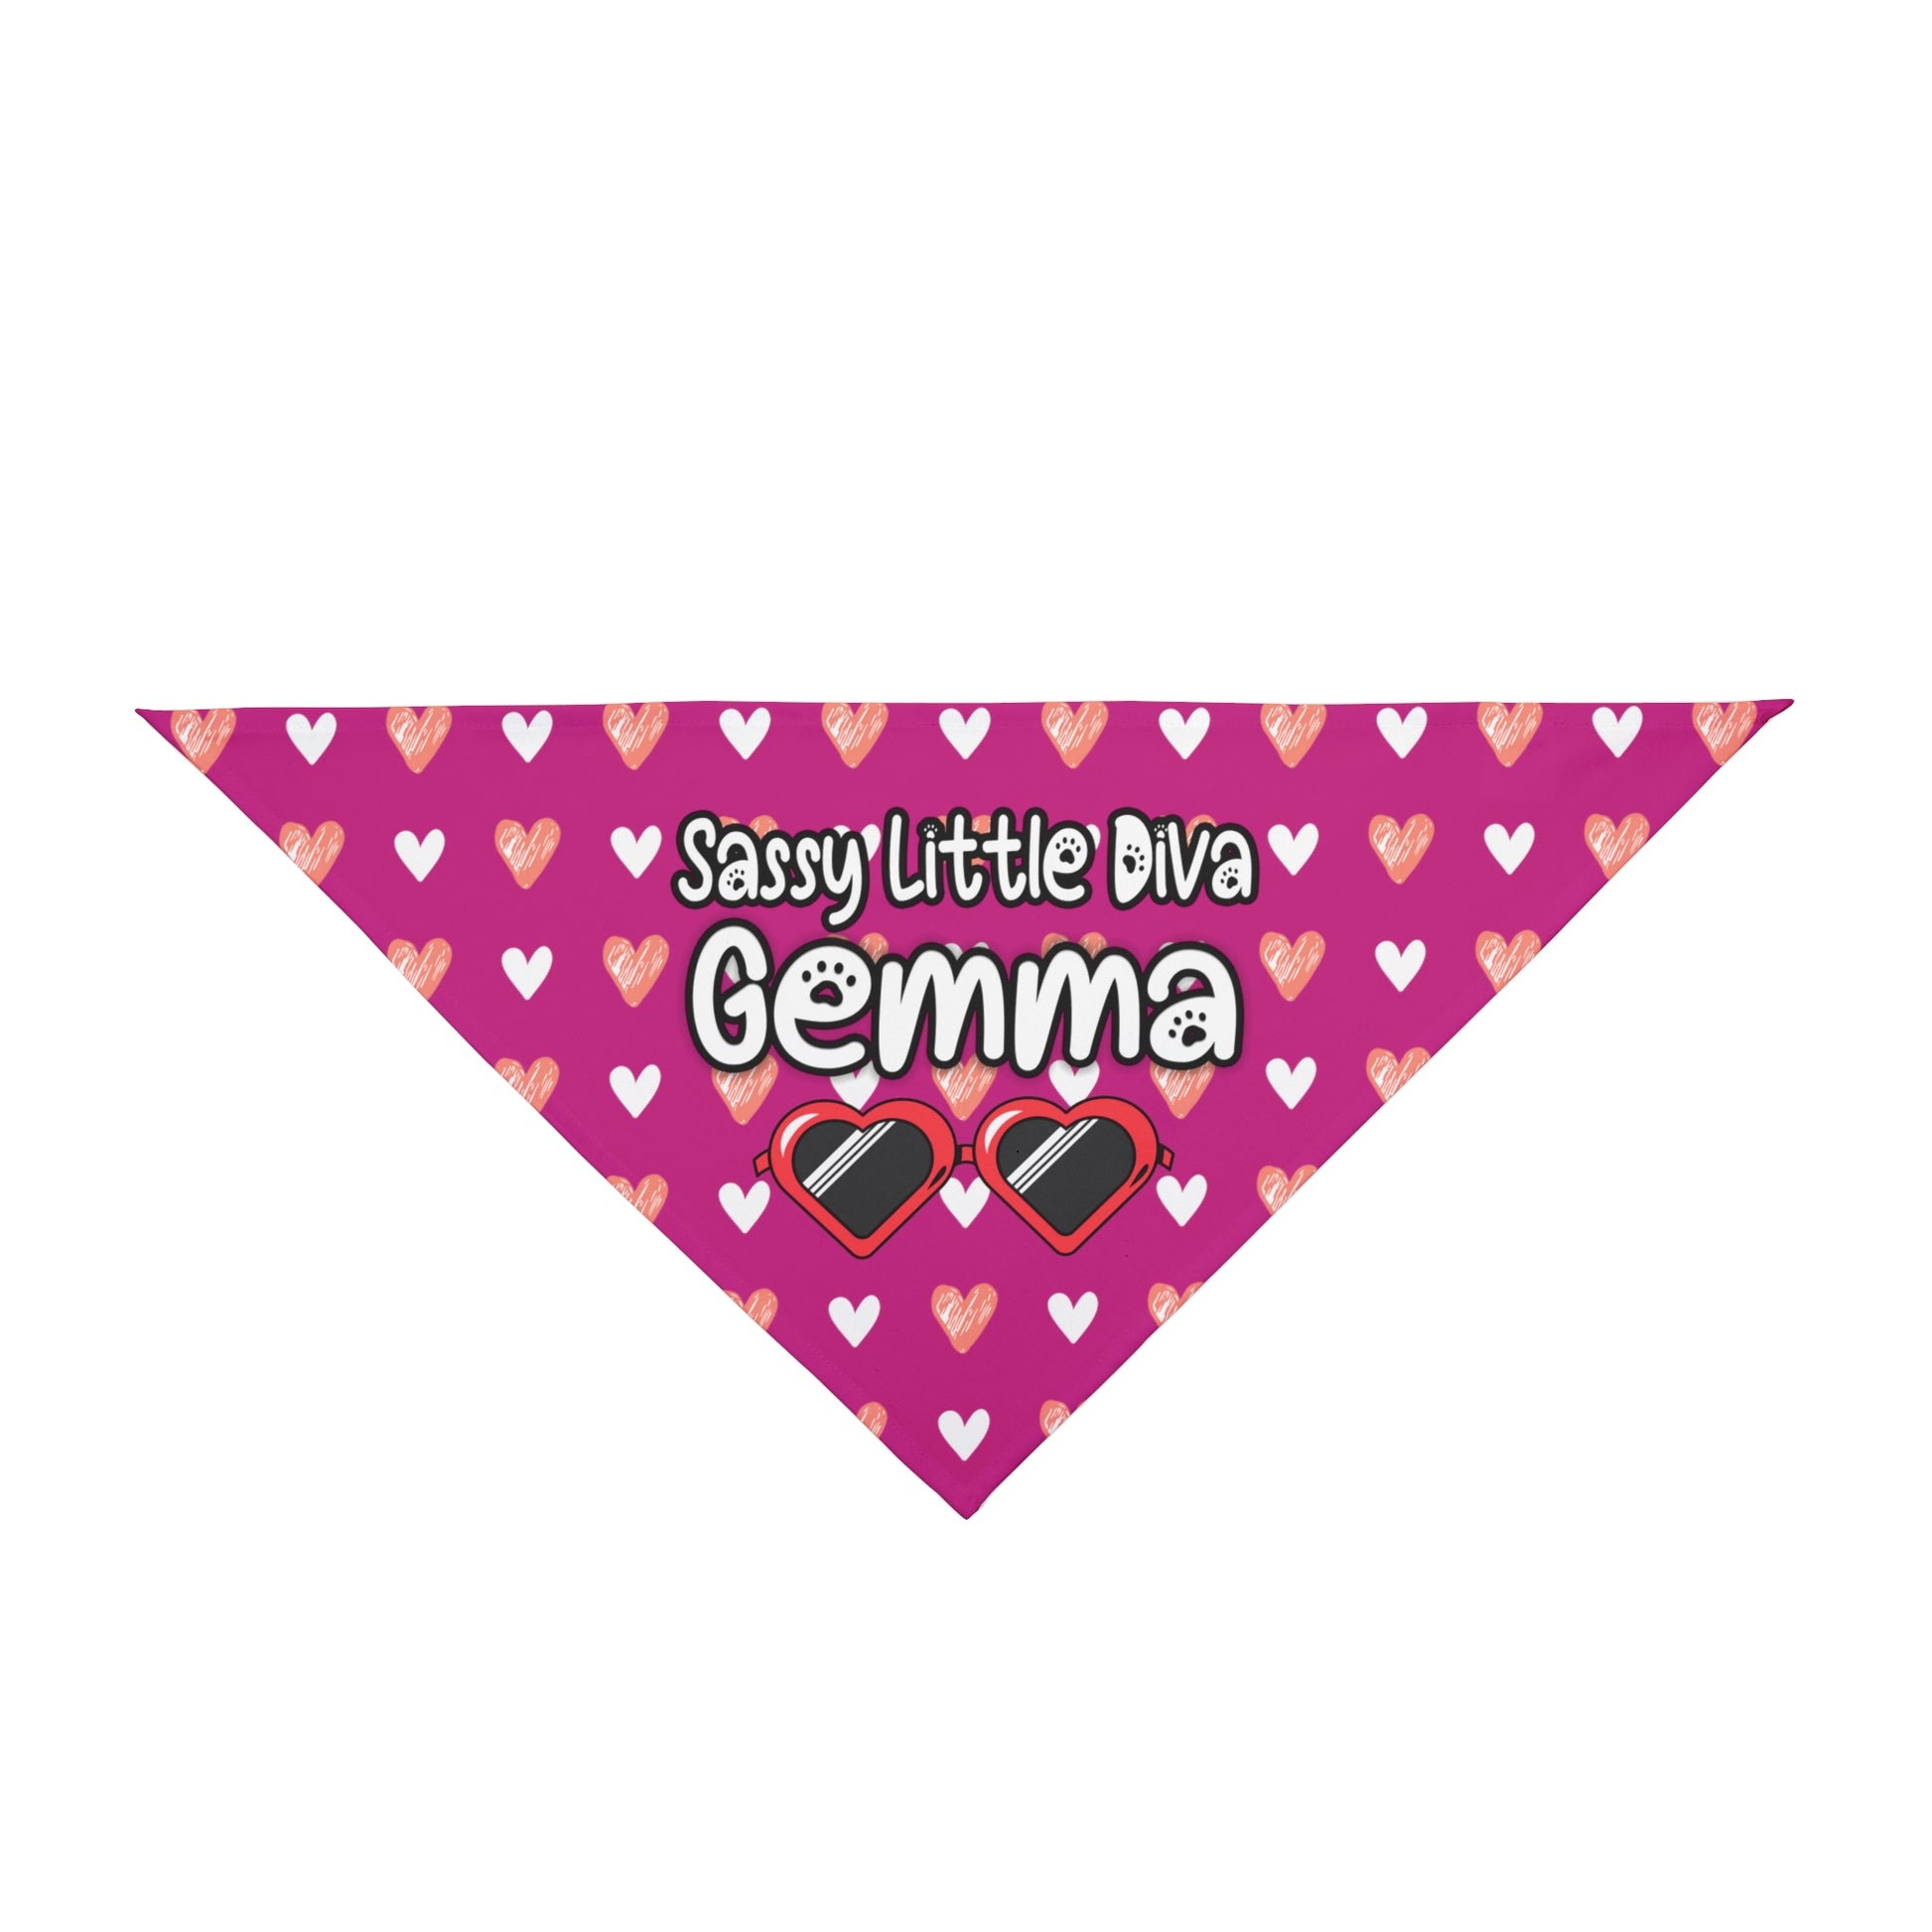 A pet bandana with a beautiful hearts pattern design with a message that says: "Little Diva Gemma" and sun glasses. Bandana's Color is pink